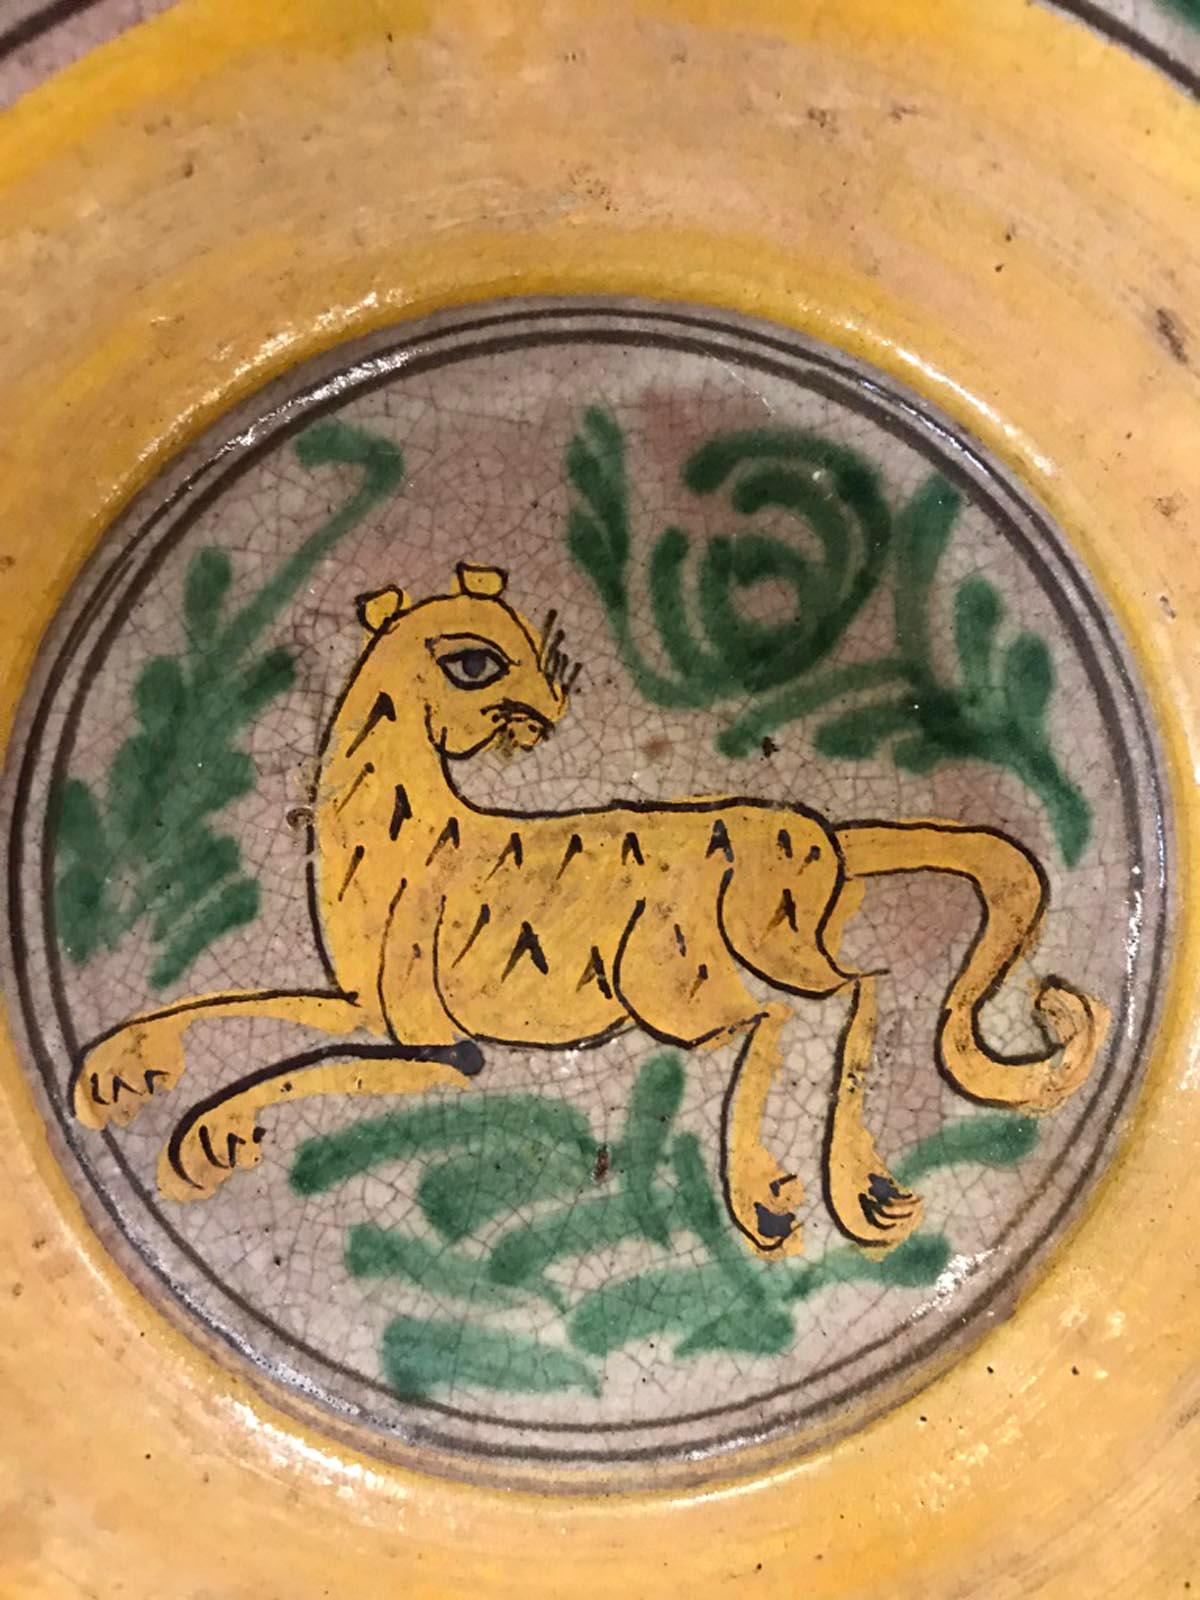 Ceramic plate made by the Montiel factory in Antigua Guatemala. All plates from the Montiel factory are handmade, glazed and decorated and fired in wood ovens. These plates are considered Guatemalan Majolica. Made in the 1930s-1940s. Each comes with